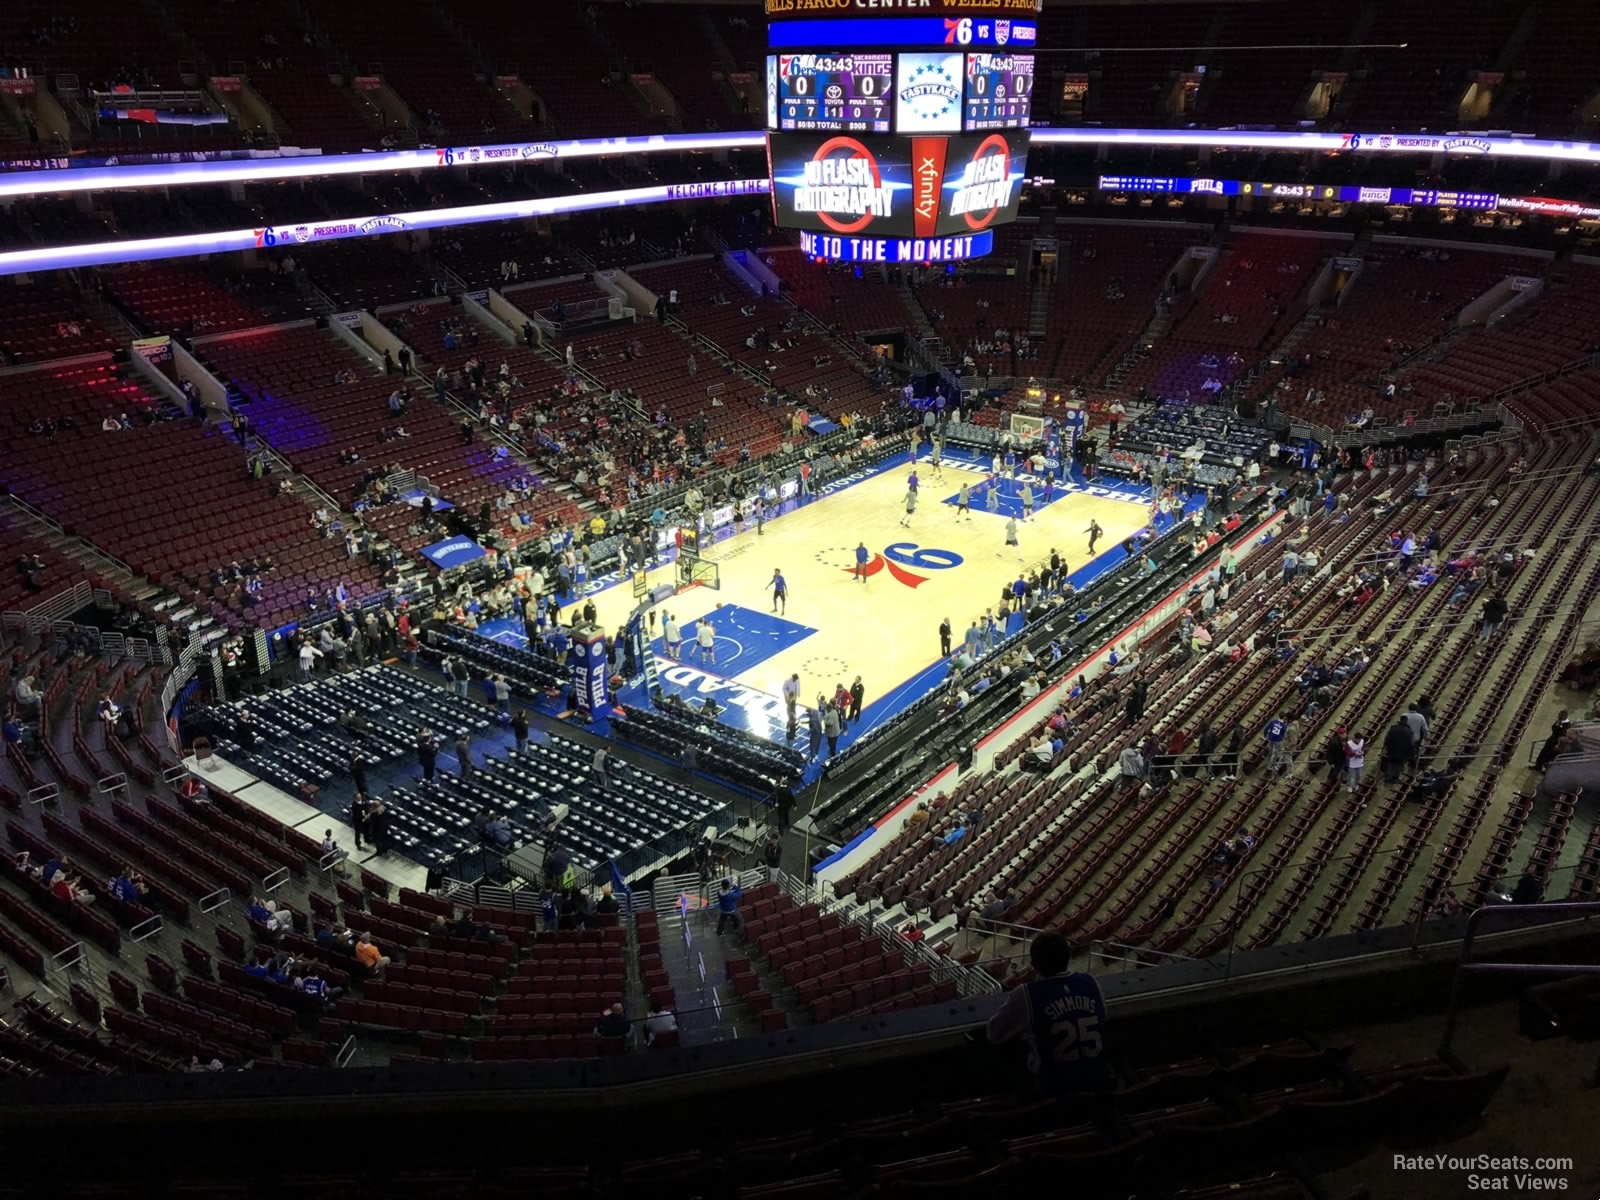 section 209a, row 7 seat view  for basketball - wells fargo center